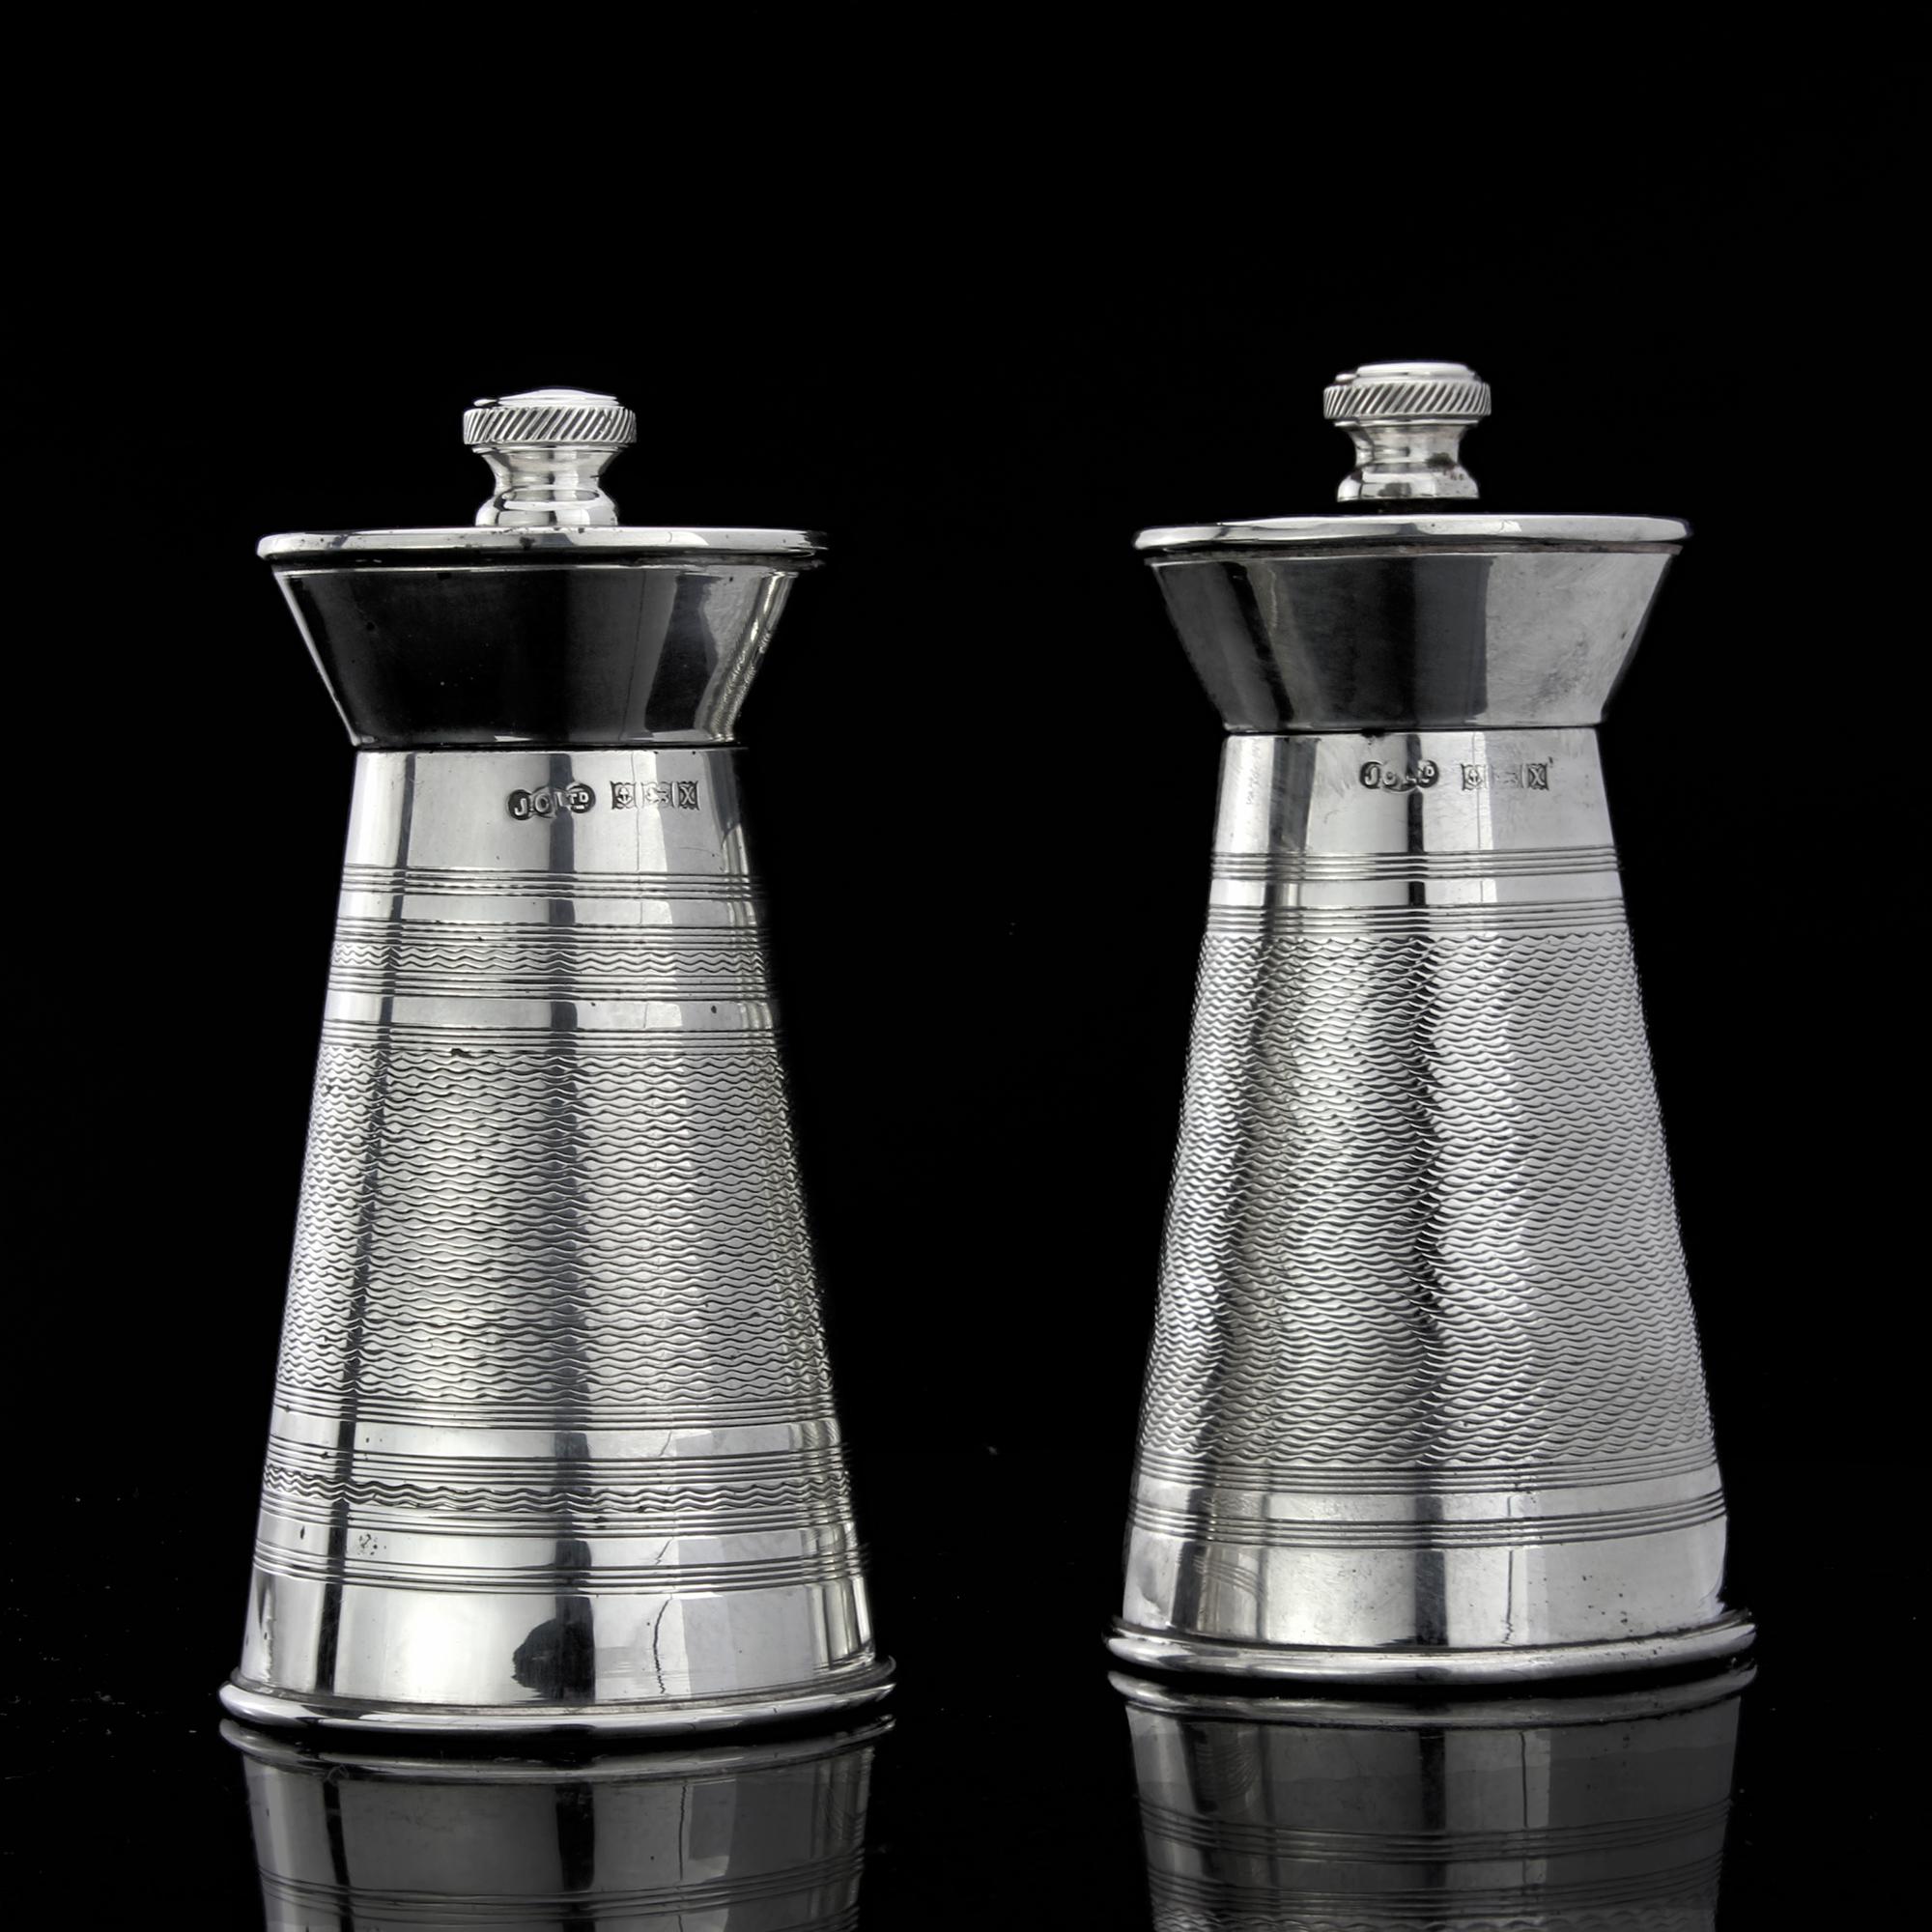 Vintage sterling silver salt and pepper grinders
Made in England, Birmingham, 1972
Maker: Joseph Gloster Ltd
Fully hallmarked.

Approximate dimensions:
Size: Dimeter x height 5 x 10 cm
Weight: 335 grams

Condition: General usage, age